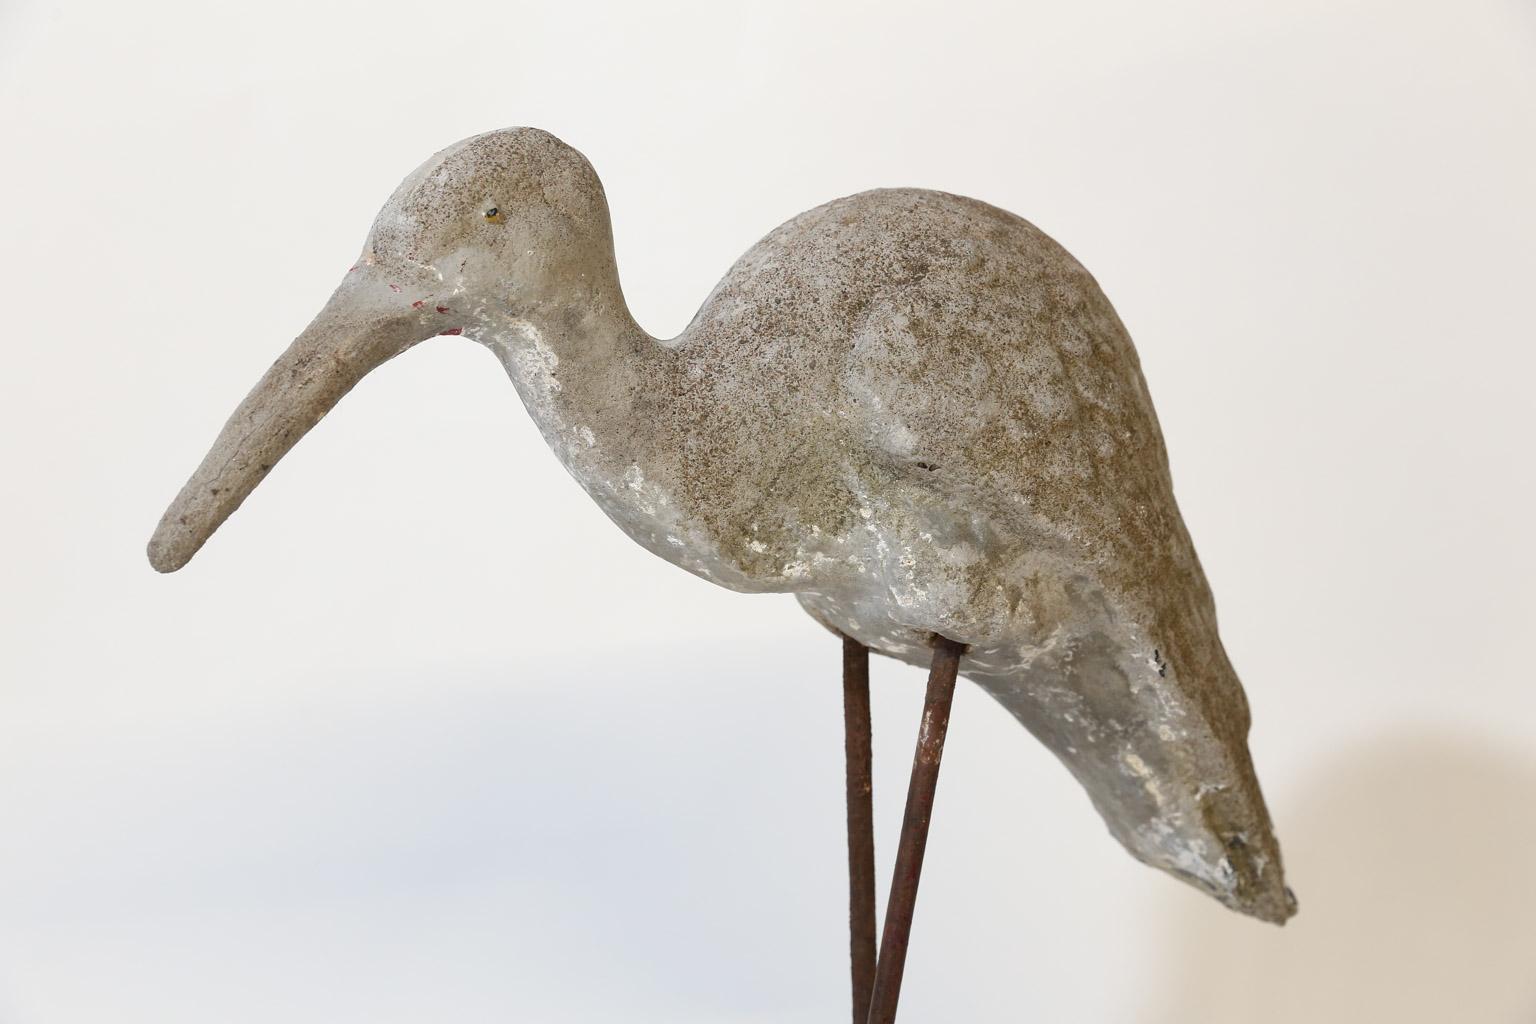 This concrete shore bird sits on iron legs and a concrete base. Found in southern France this piece will add a bit of whimsy to your home or garden.